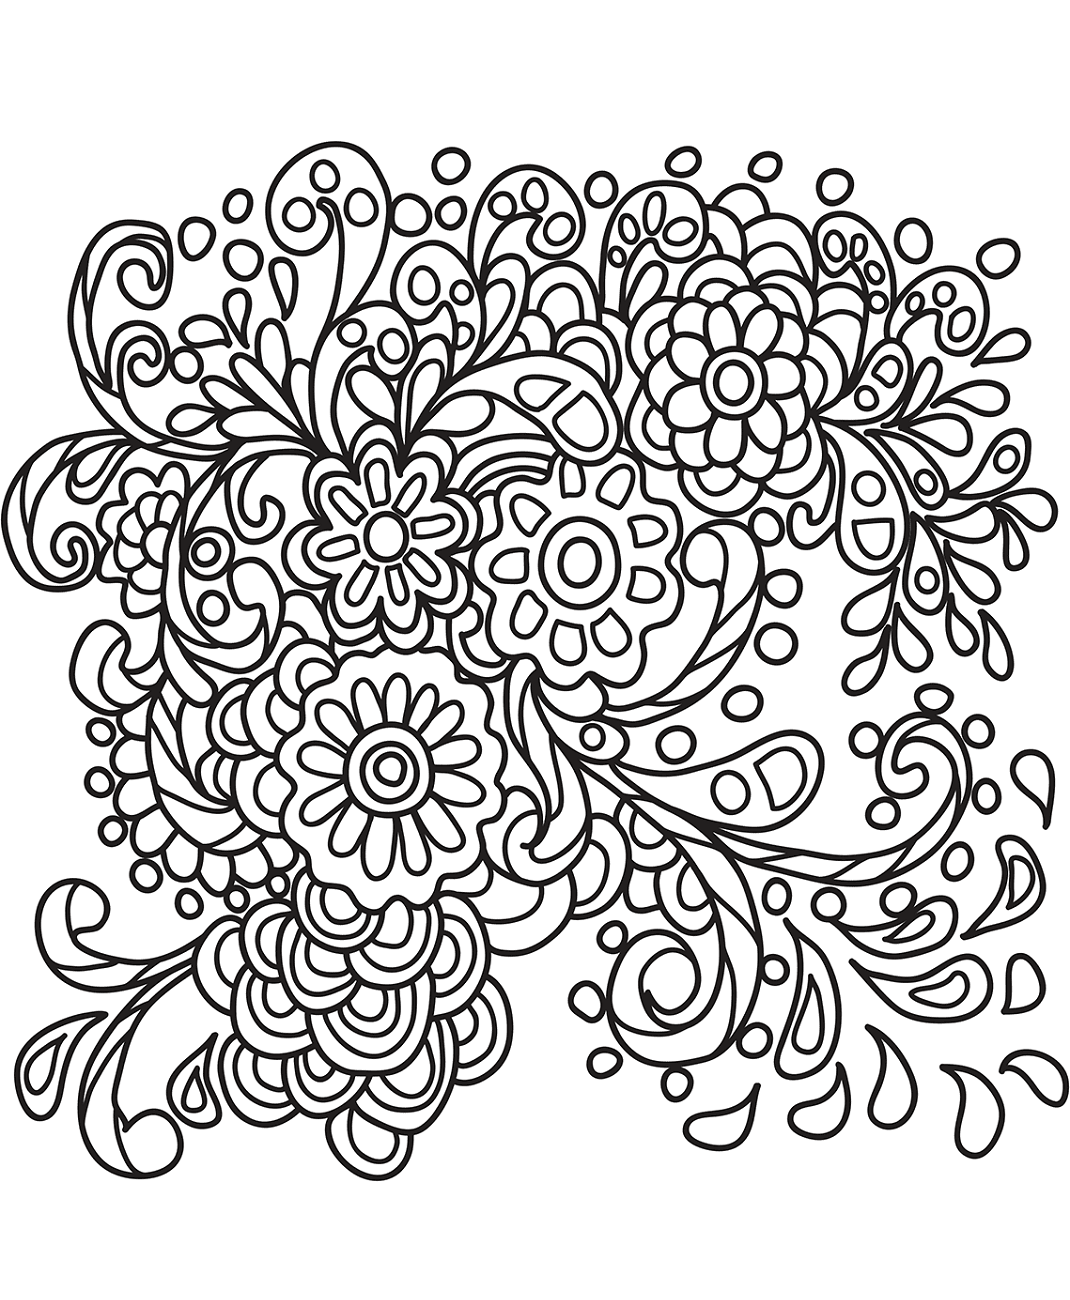 Flowers Doodle Art Coloring Page Free Printable Coloring Pages For Kids